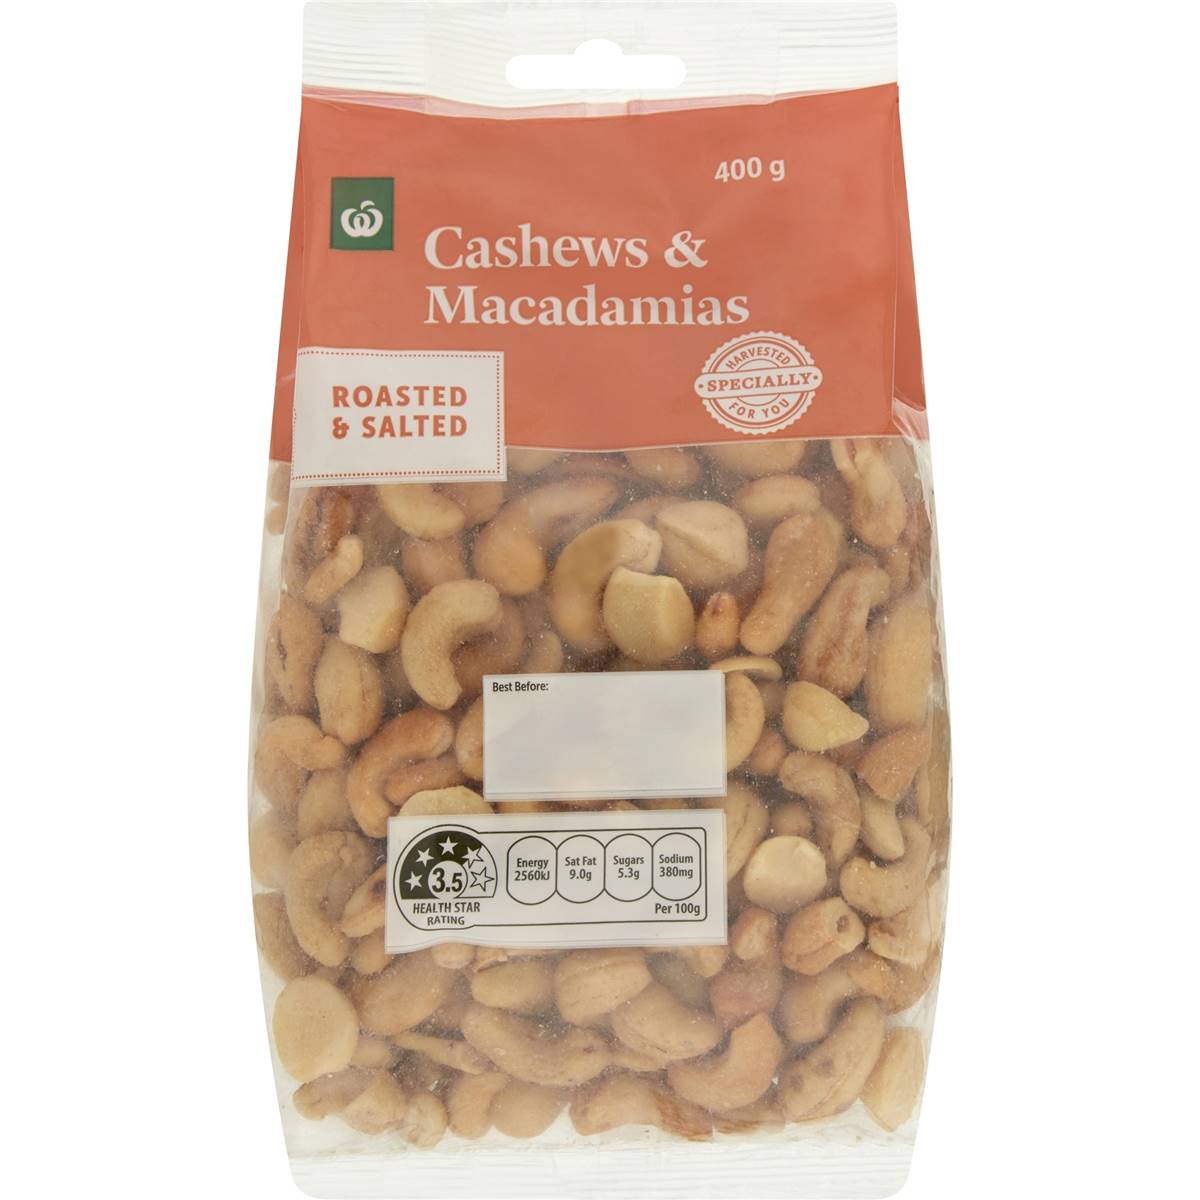 Calories in Woolworths Cashew & Macadamia Roasted & Salted